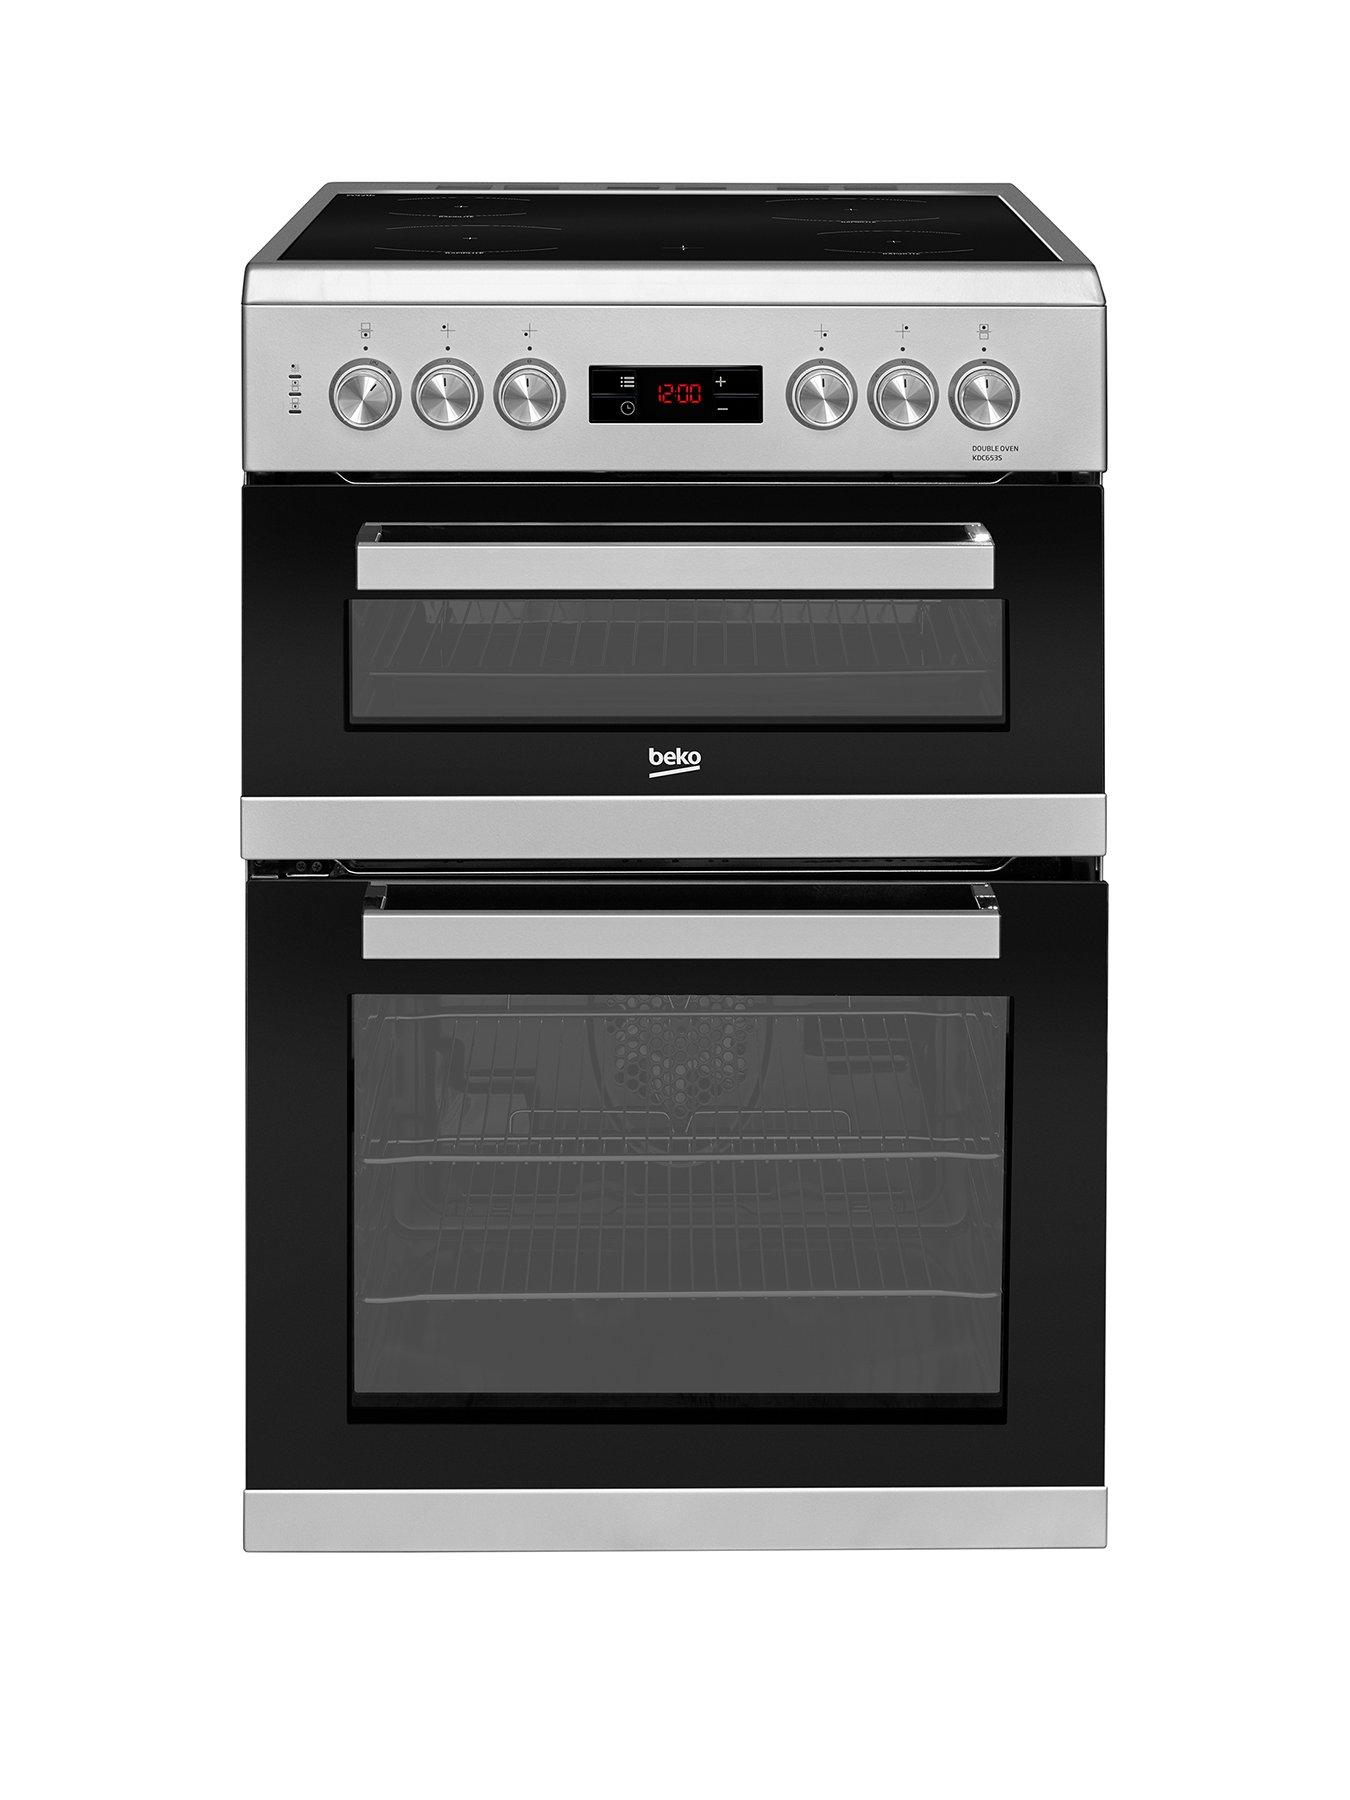 Beko Kdc653S 60Cm Double Oven Electric Cooker - Silver - Cooker Only